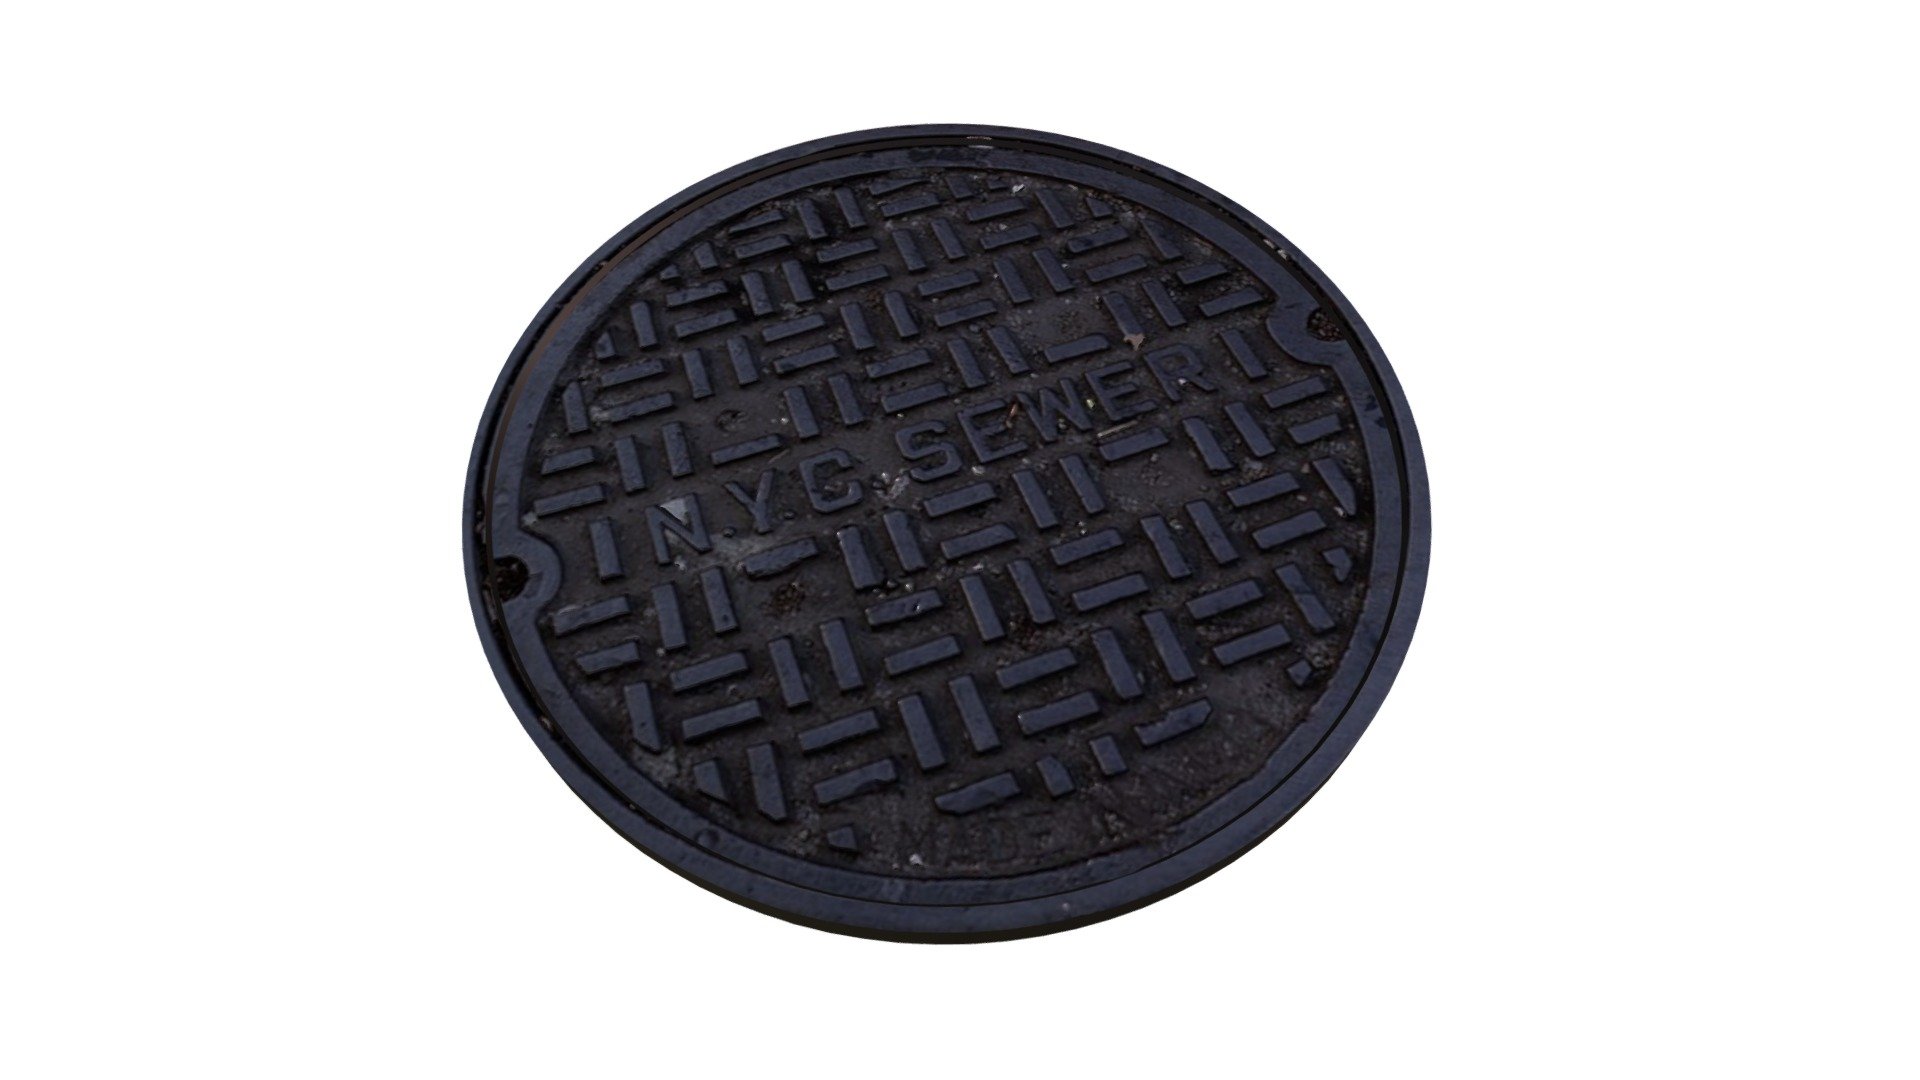 NYC Manhole Cover
Made in Maya - NYC Manhole Cover - Buy Royalty Free 3D model by AirStudios (@sebbe613) 3d model